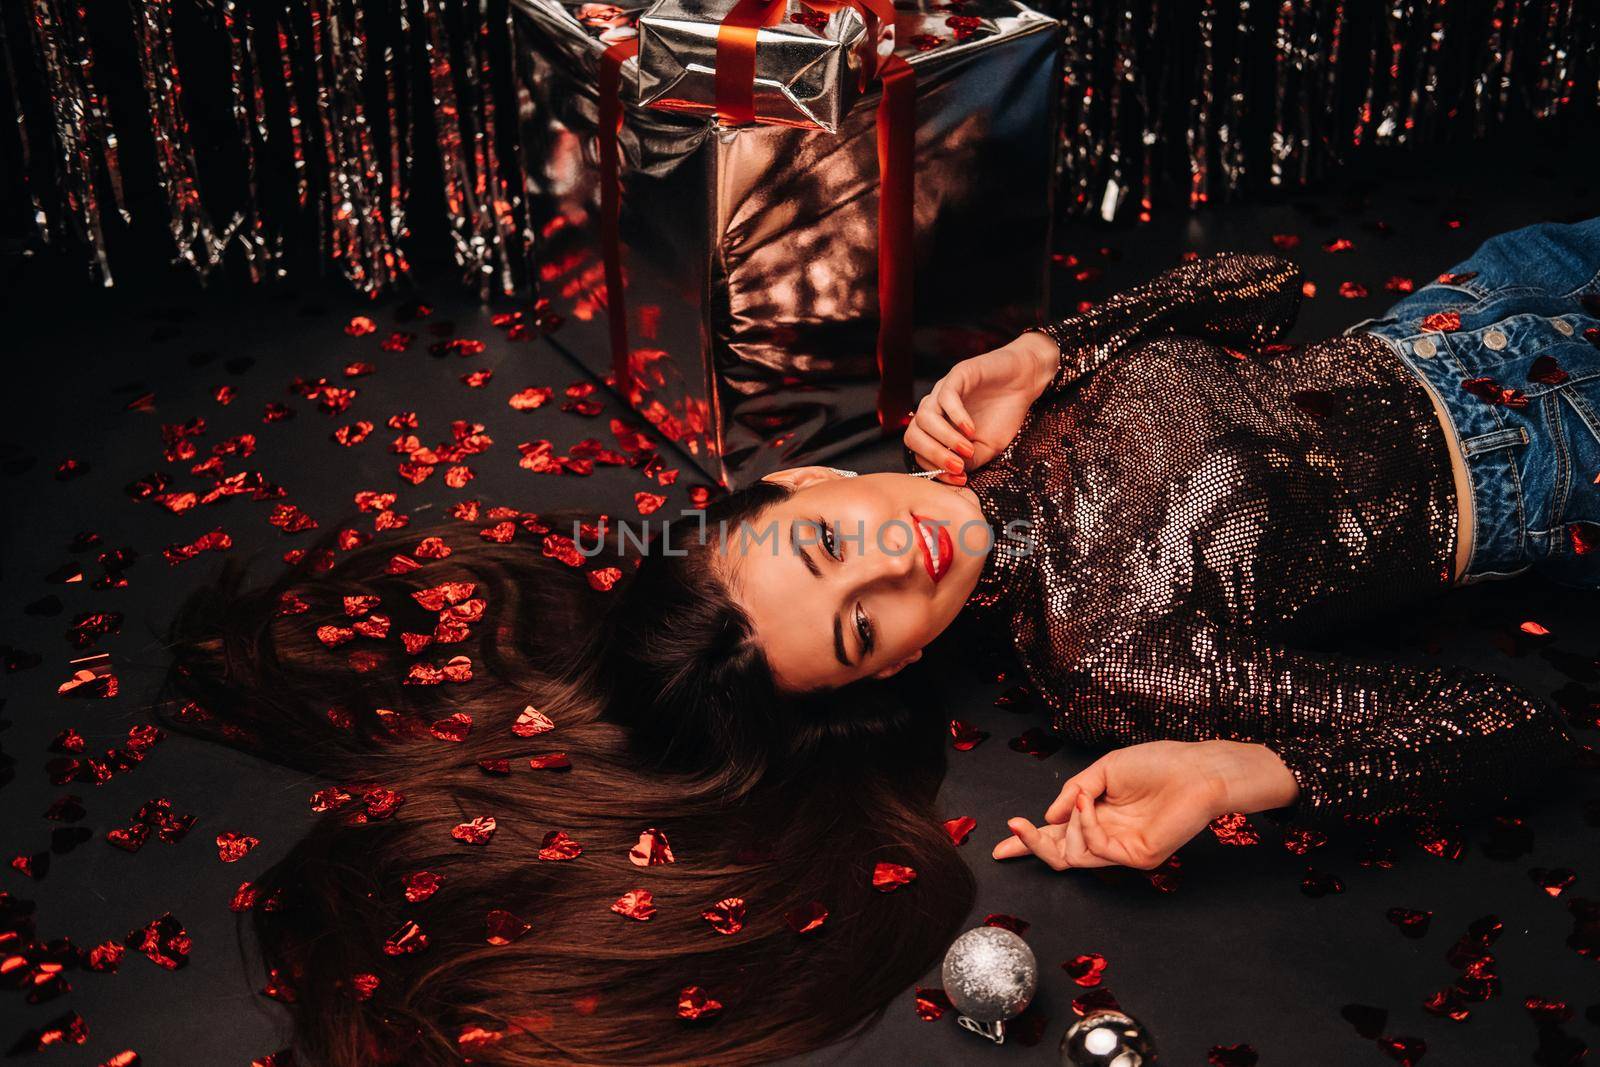 Top view of a girl lying in shiny clothes on the floor in confetti in the form of hearts.